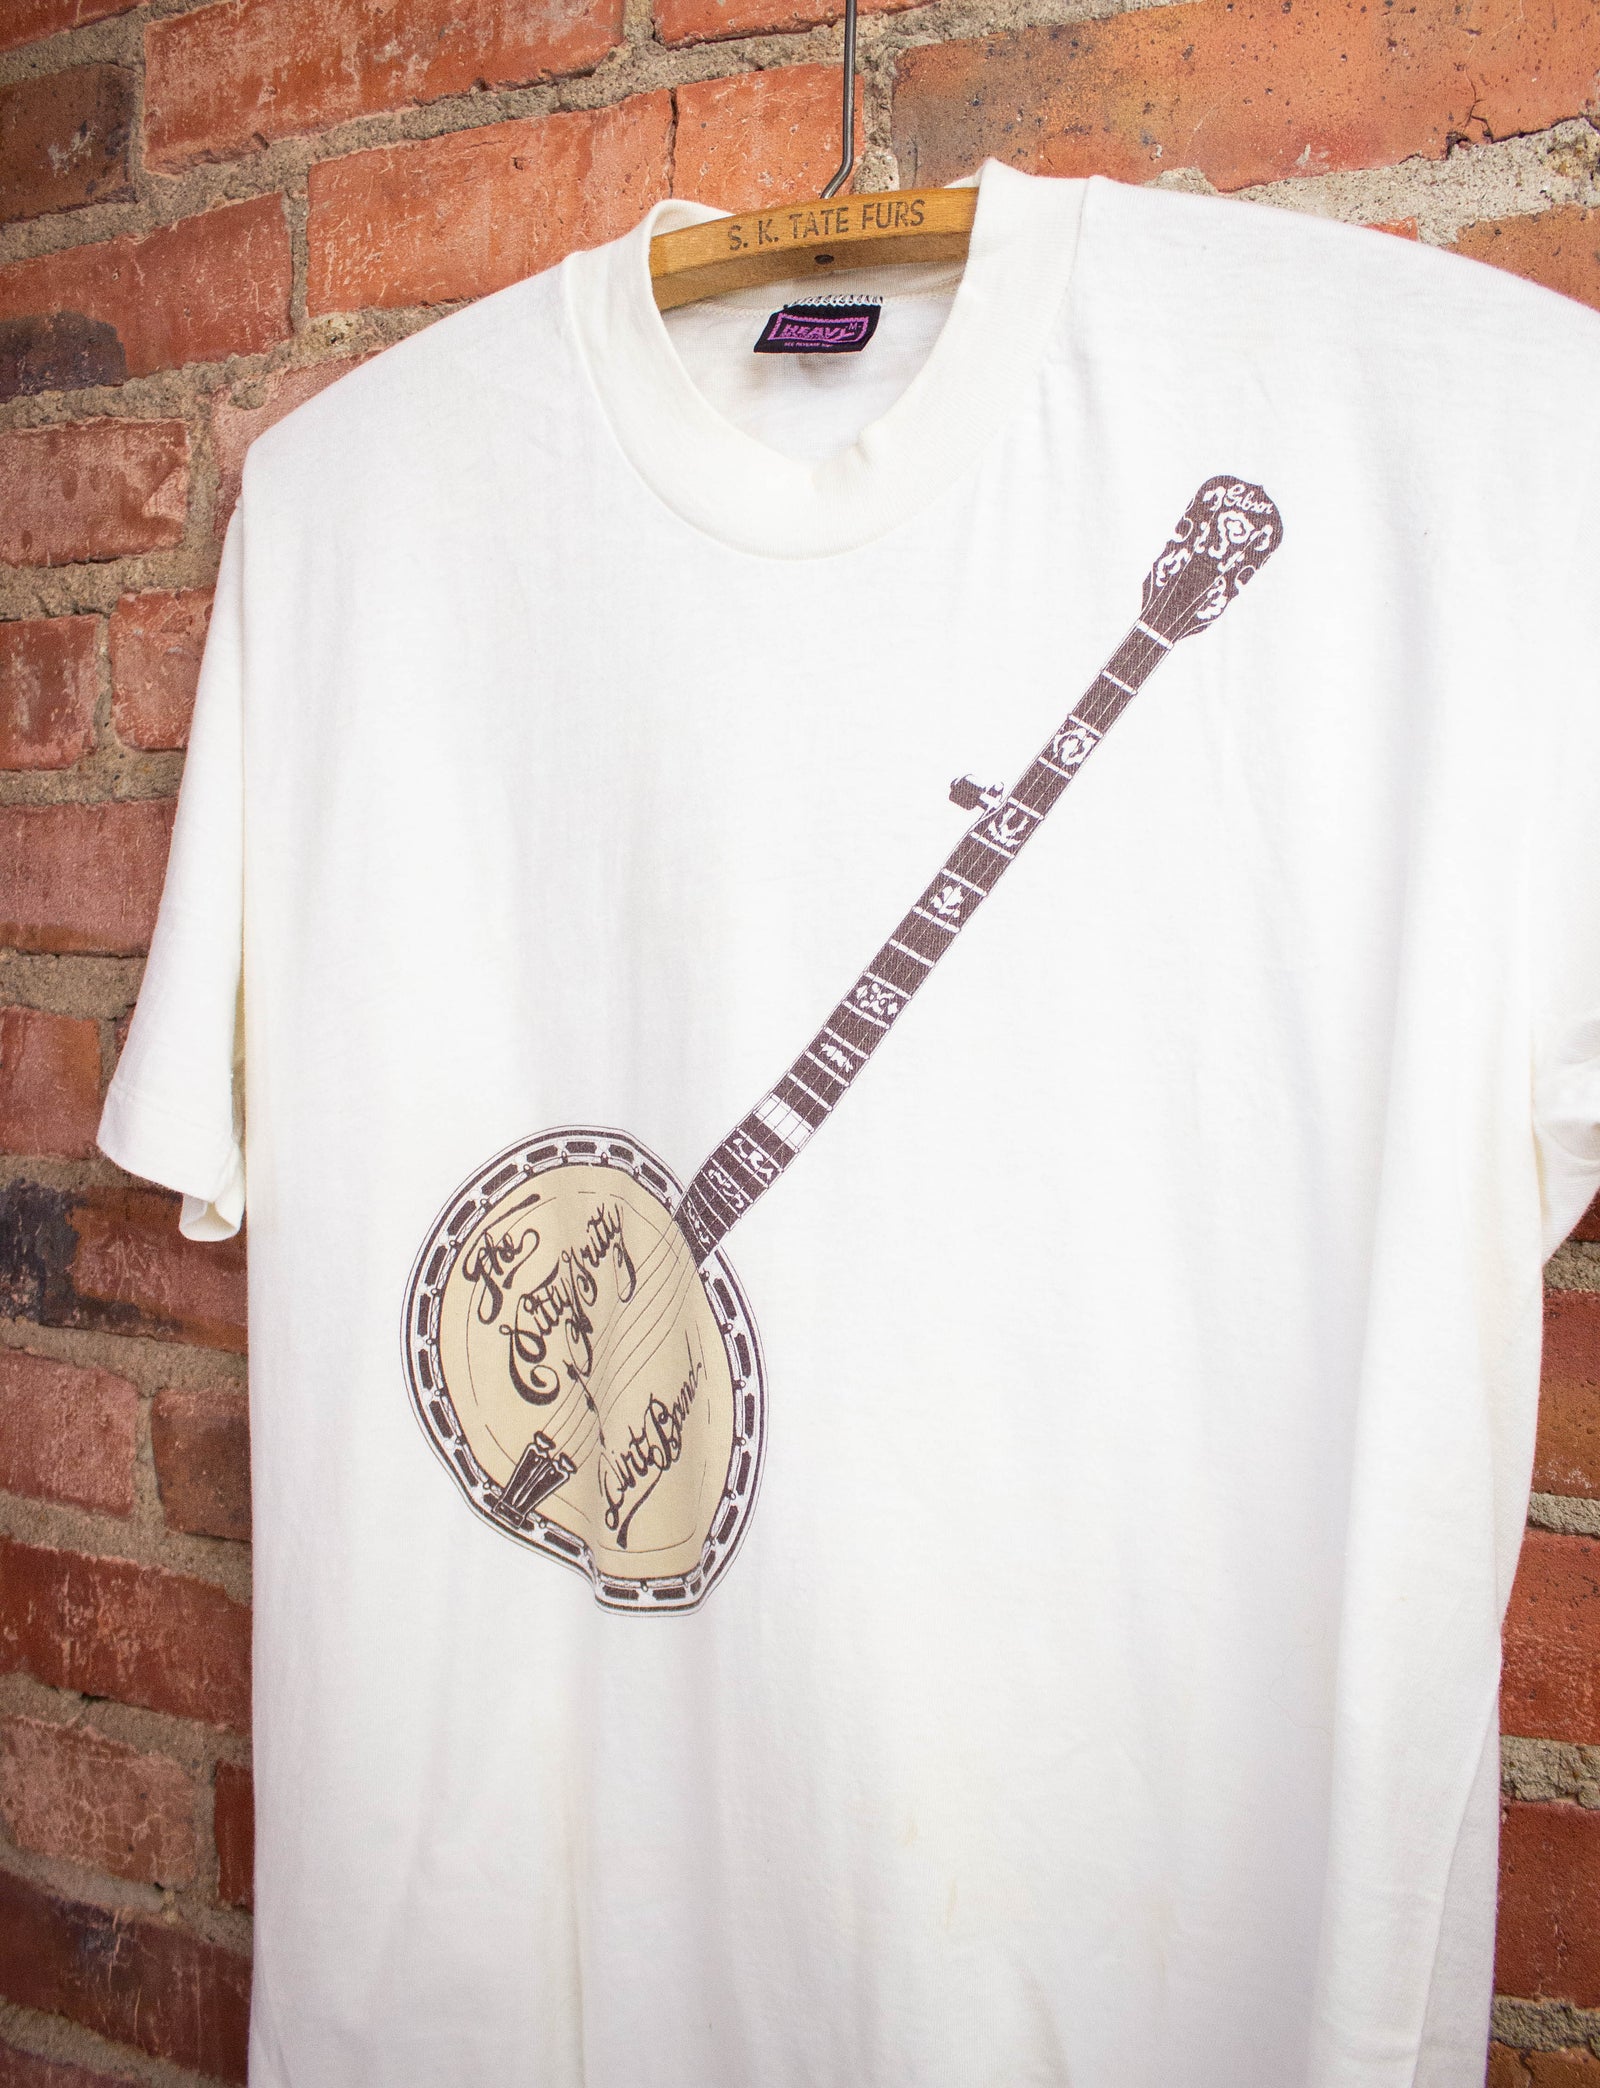 Vintage The Nitty Gritty Dirt Band Banjo Concert T-Shirt 1974 M